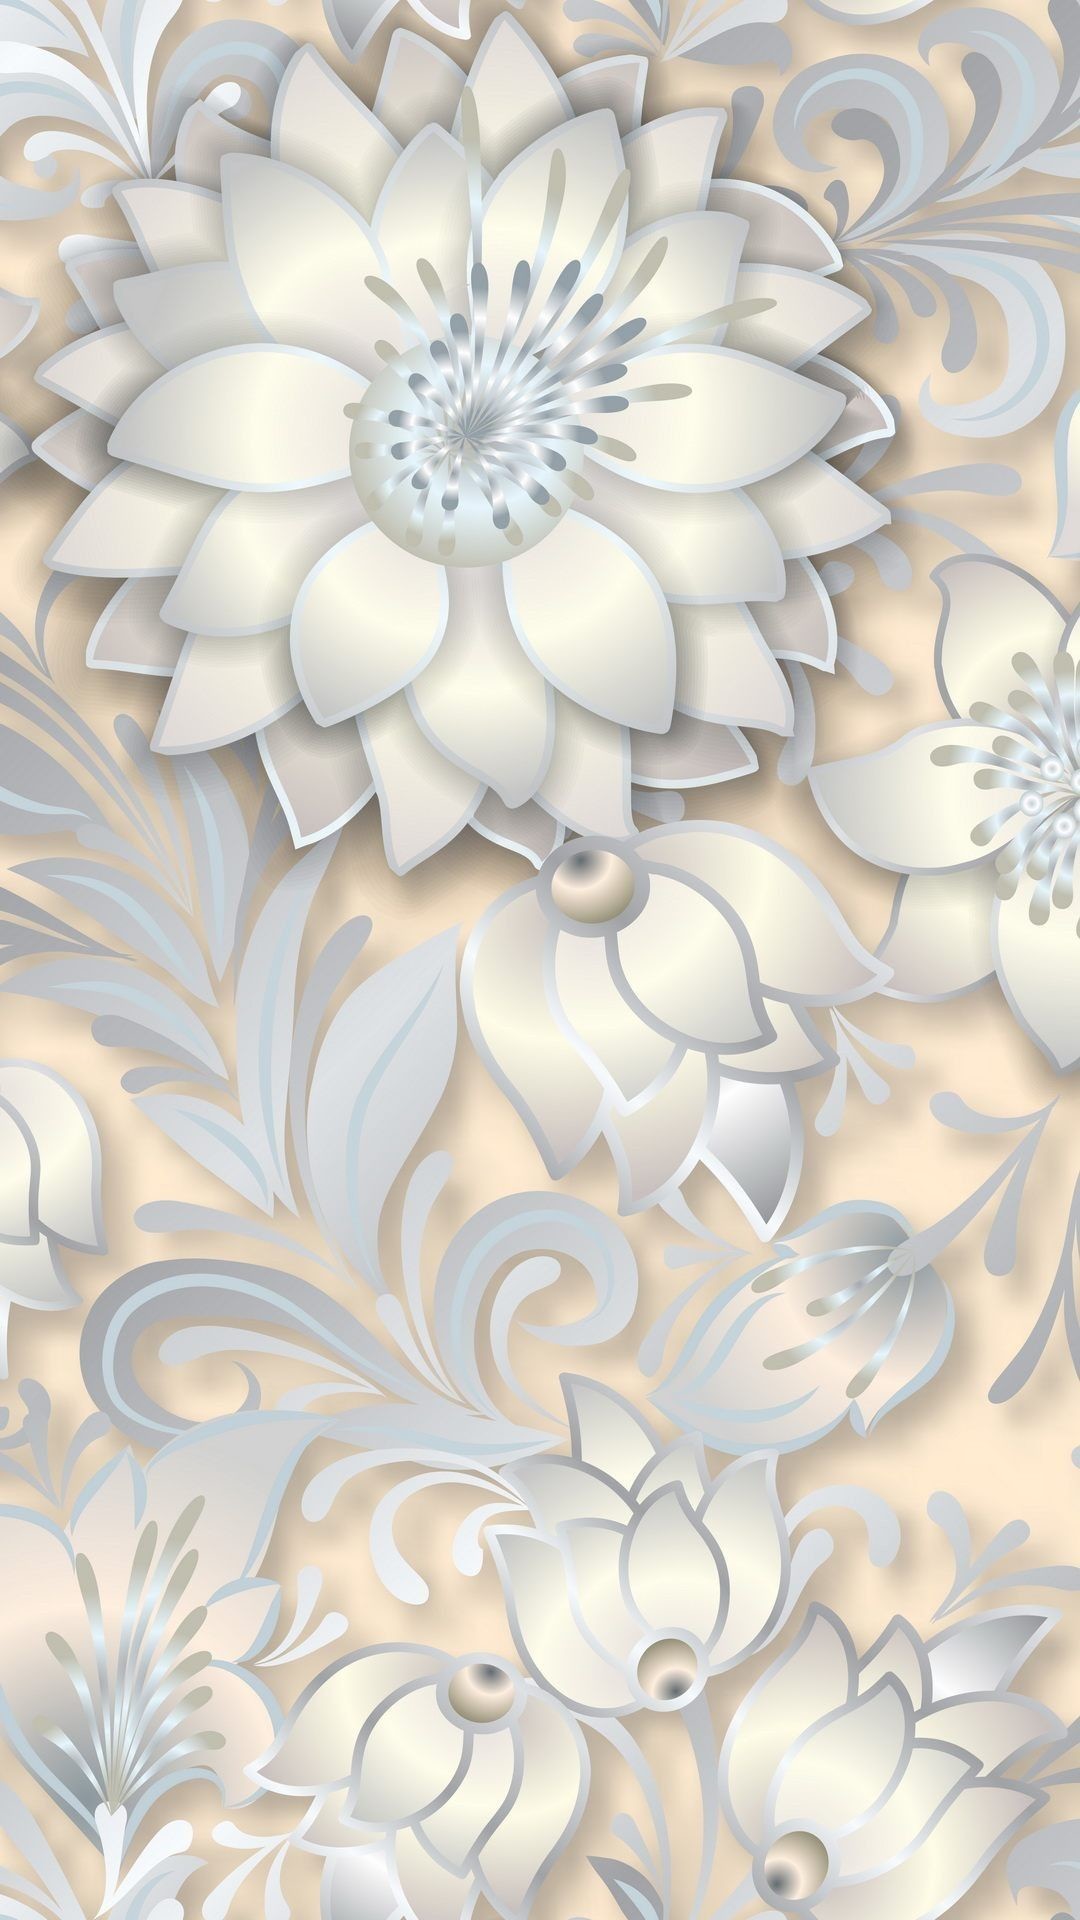 1080x1920 Silver plated flowers wallpaper. Flowers, gold, silver, vector, white,  decoration, iPhone, Android, HD Wallpaper Sazum 2017.